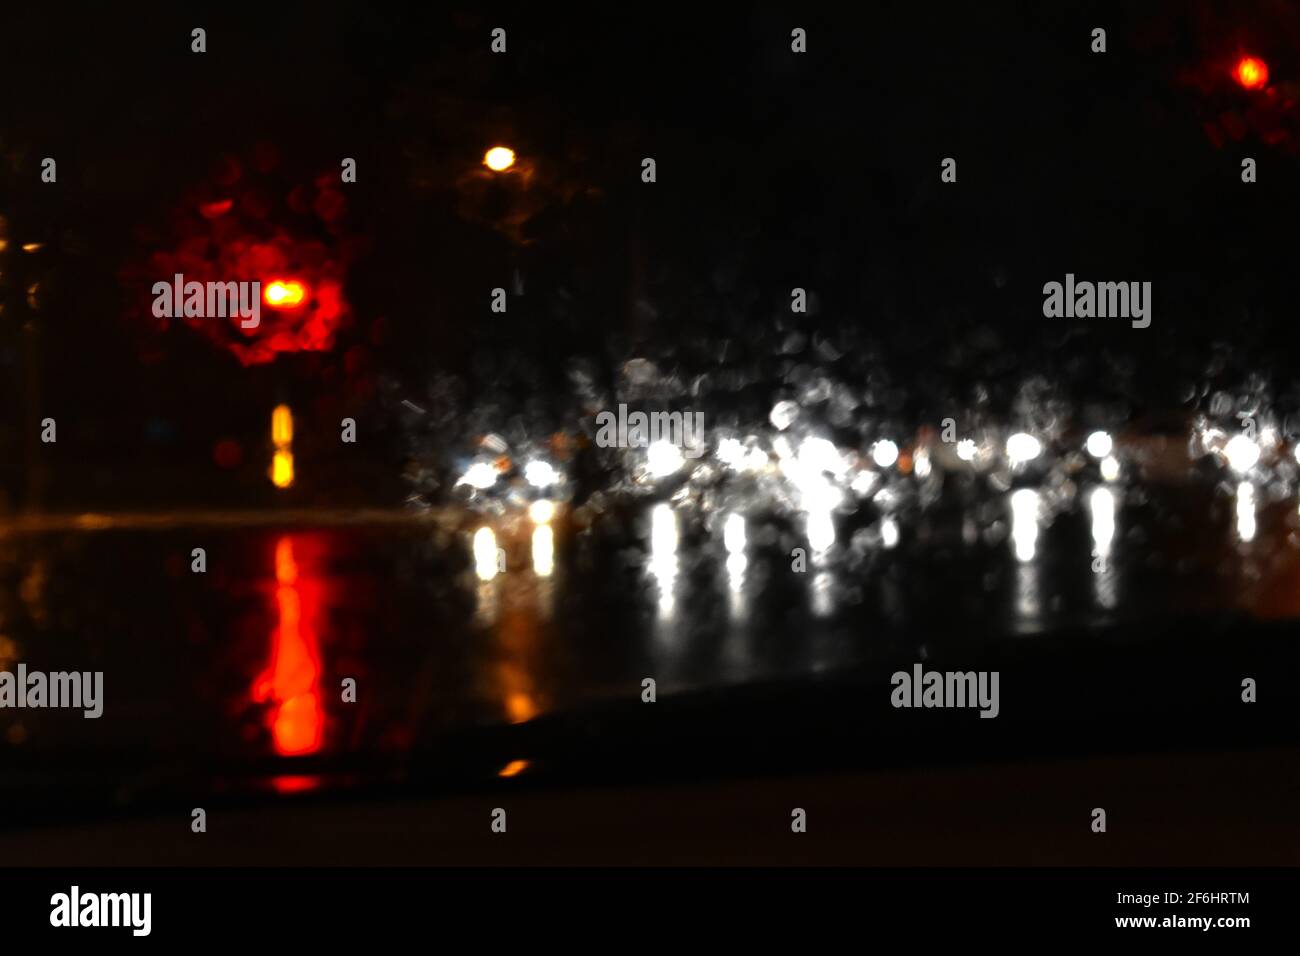 cars stopped at traffic lights with raindrops on the glass and reflections on the flooded road. Taken during floods in Sydney during March 2021. Stock Photo